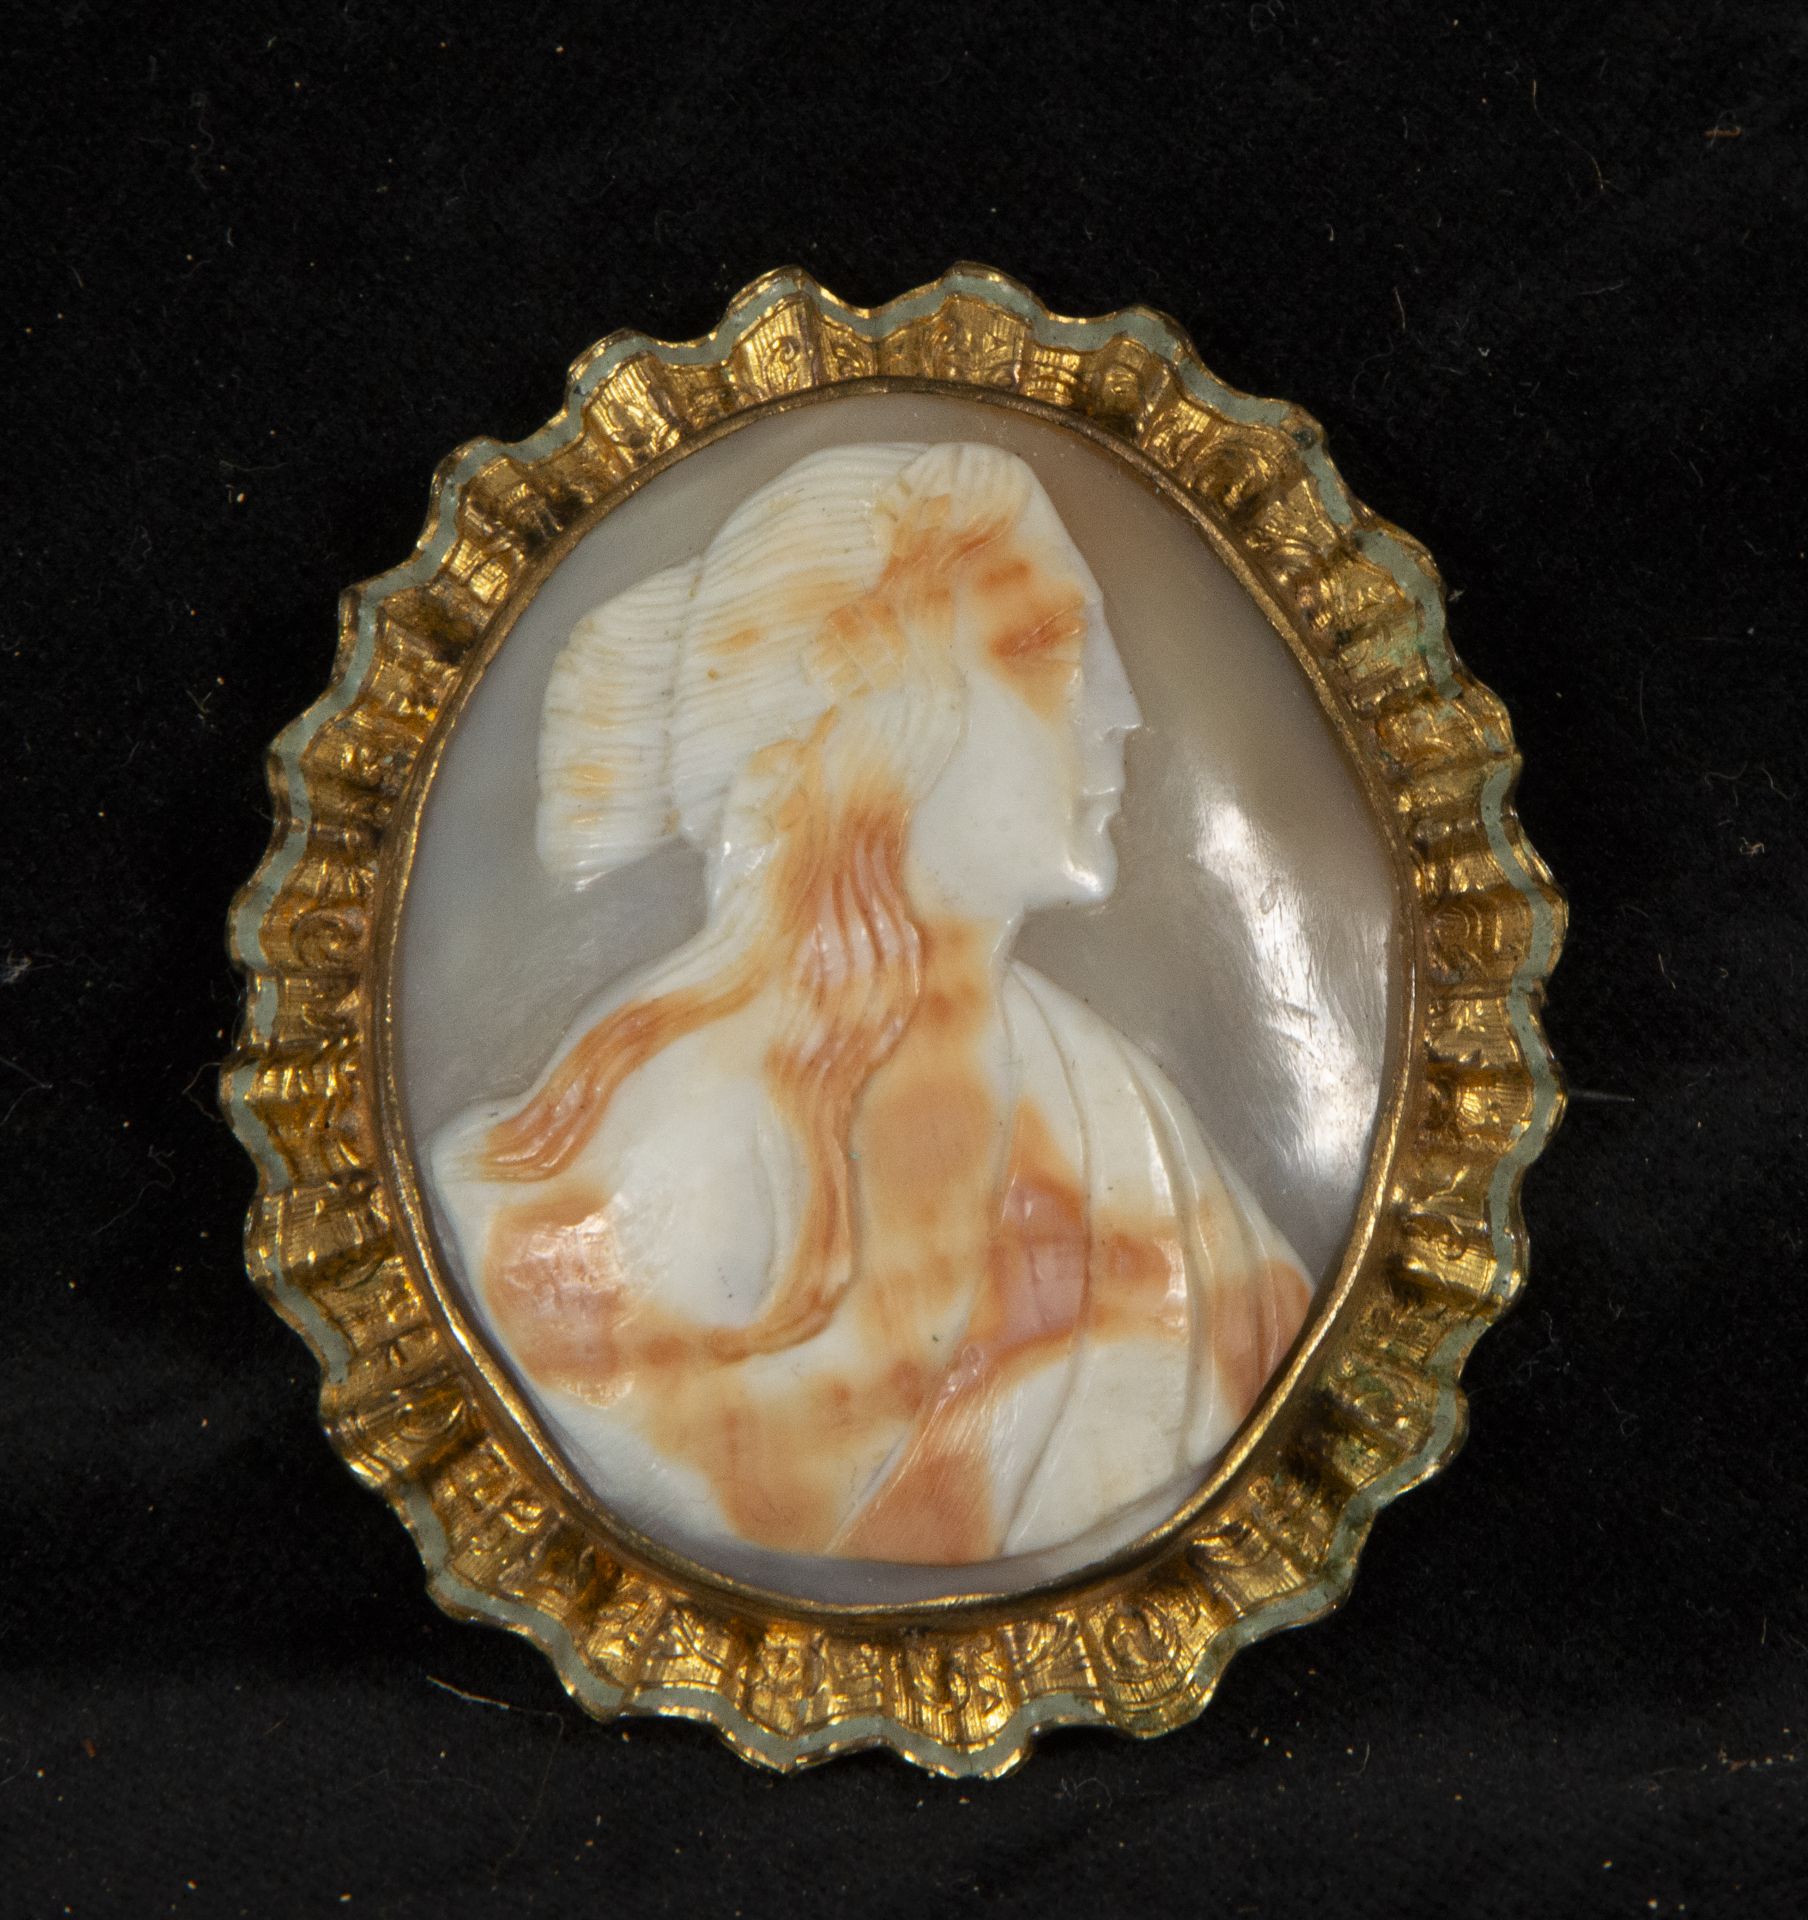 Carved mother-of-pearl shell cameo pendant, 19th century